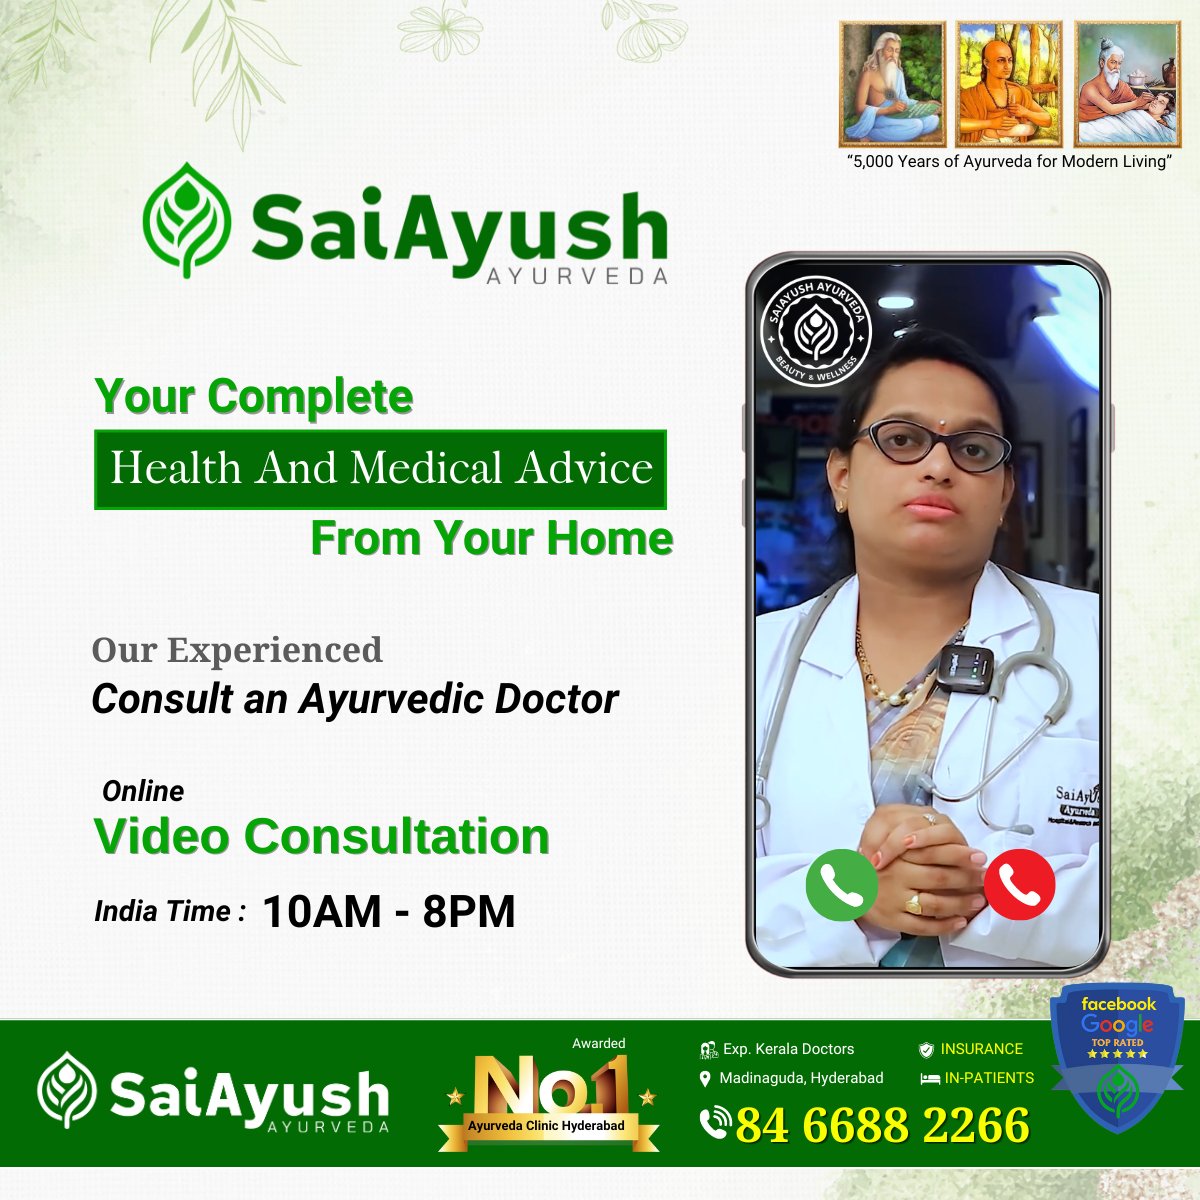 Our skilled doctors will provide you with comprehensive health and Ayurvedic medical advice from the comfort of your own home.#online #doctor #onlineconsultation #doctorsofinstagram #onlinedoctor #ayurveda #OnlineConsultation #VirtualHealthcare #Telehealth #DigitalHealth